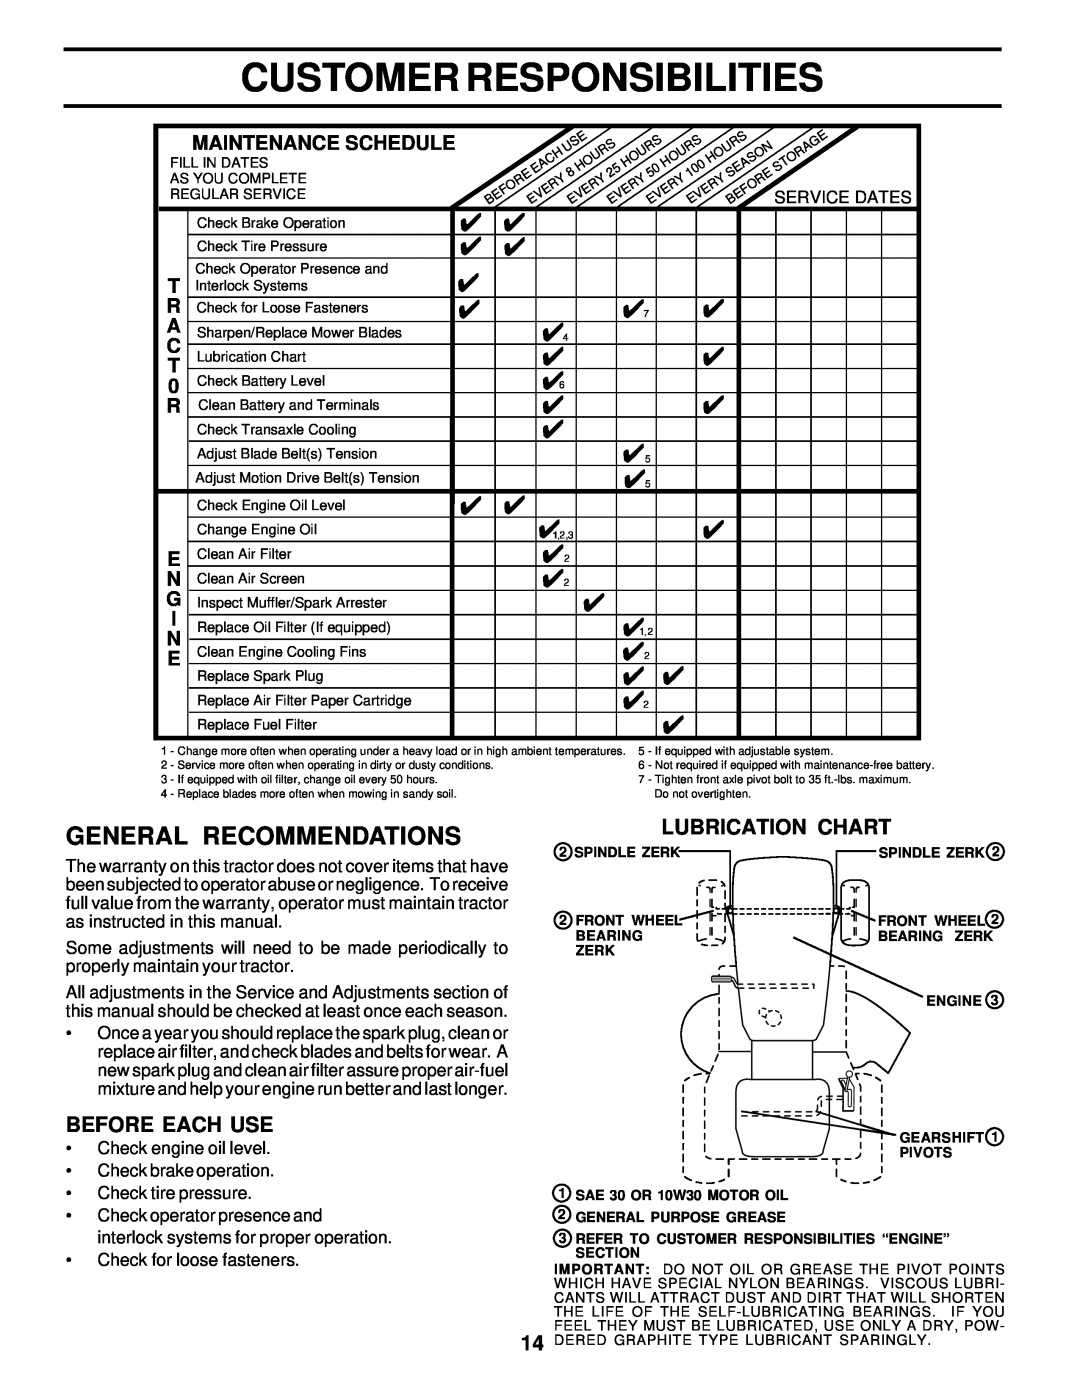 Poulan PRK17G42STB owner manual Customer Responsibilities, General Recommendations, Lubrication Chart, Before Each Use 